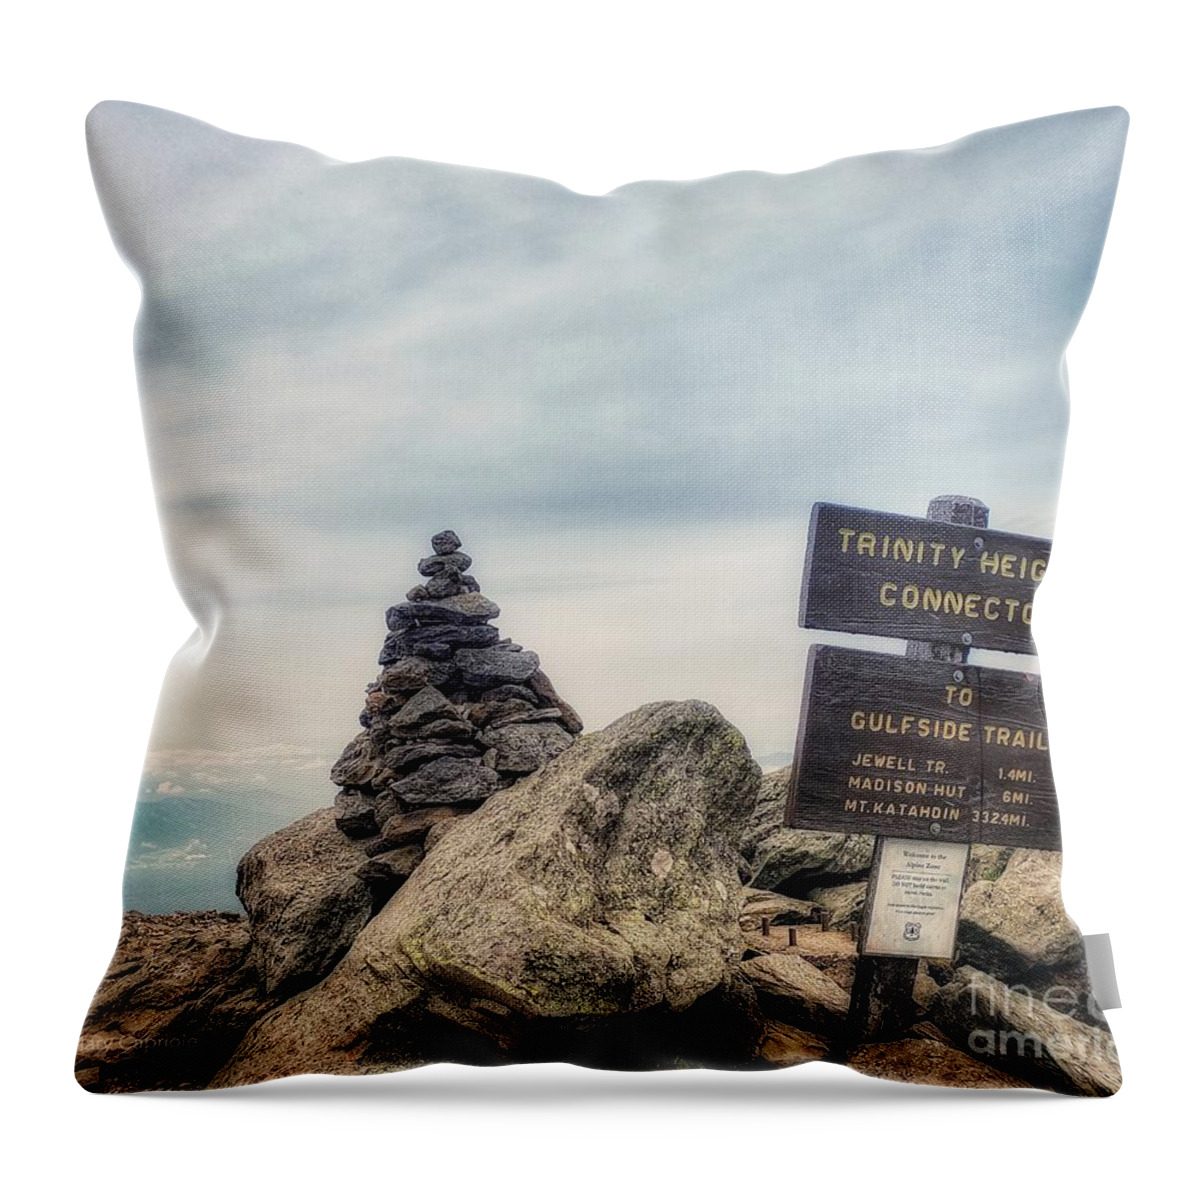 Trinity Heights Connector Throw Pillow featuring the photograph Trinity Heights Connector by Mary Capriole